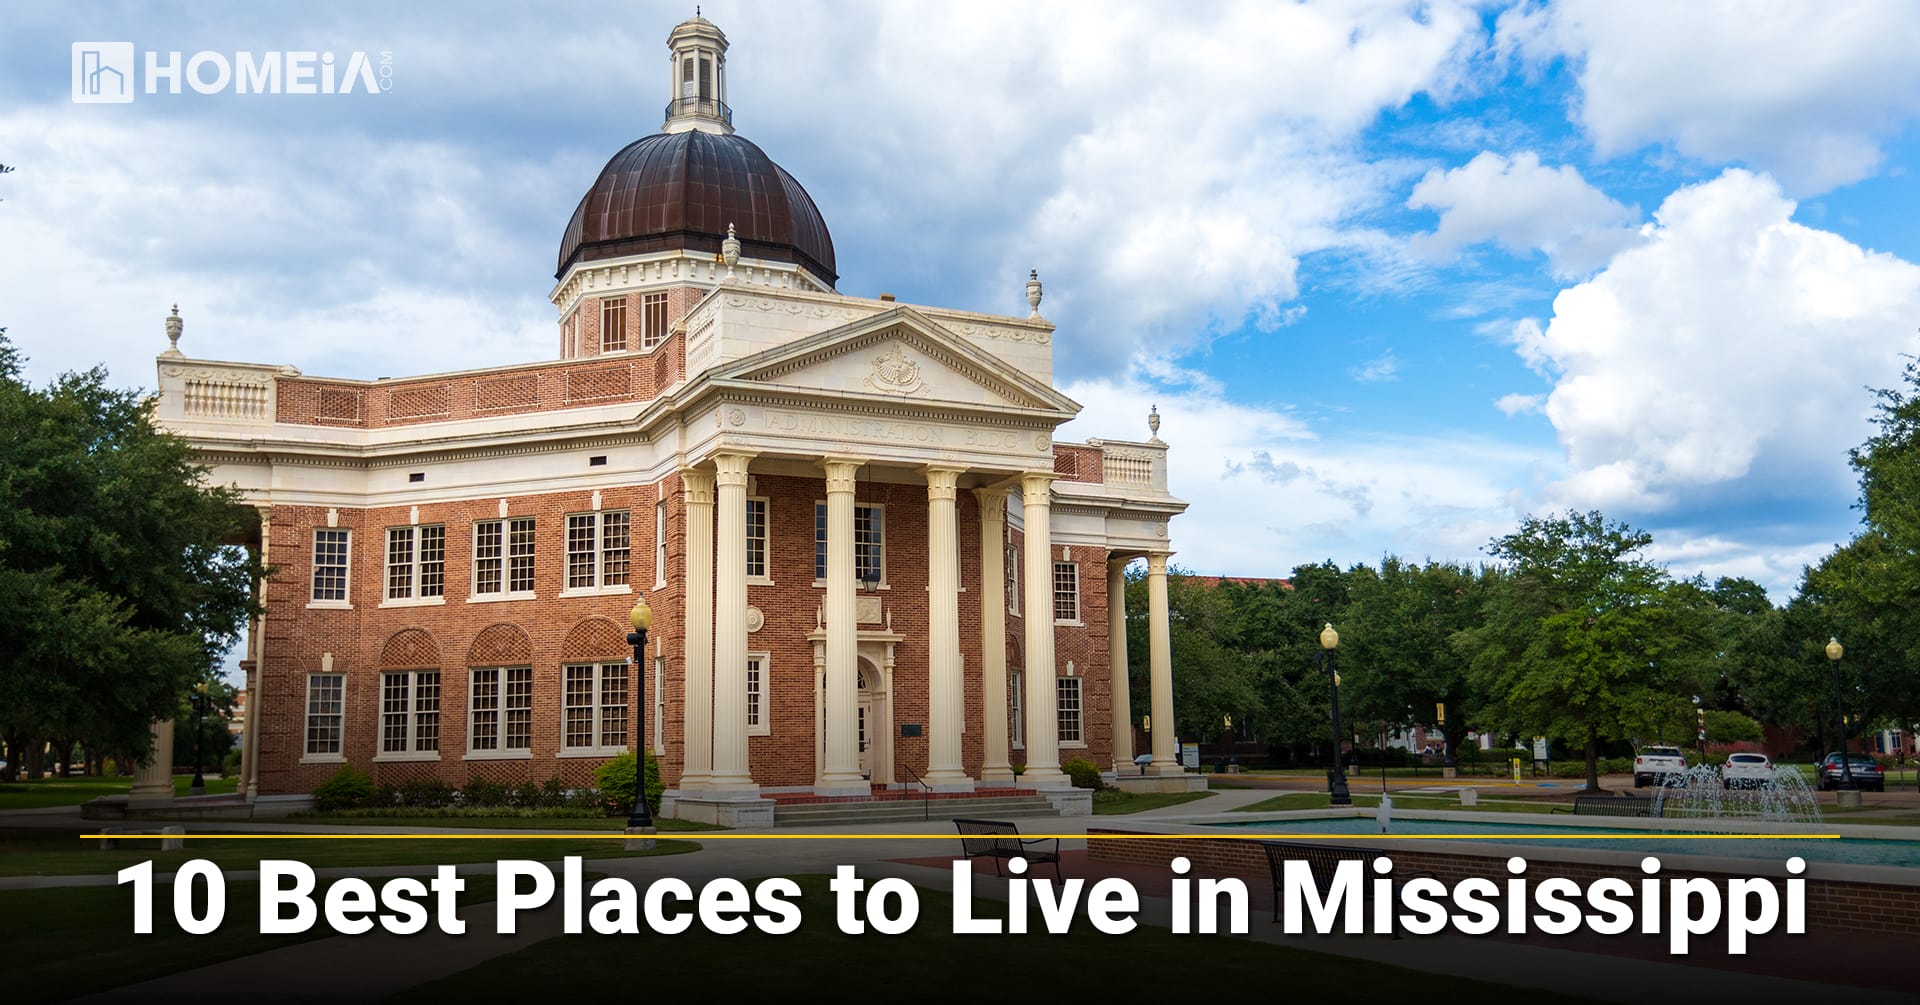 10 Best Places to Live in Mississippi